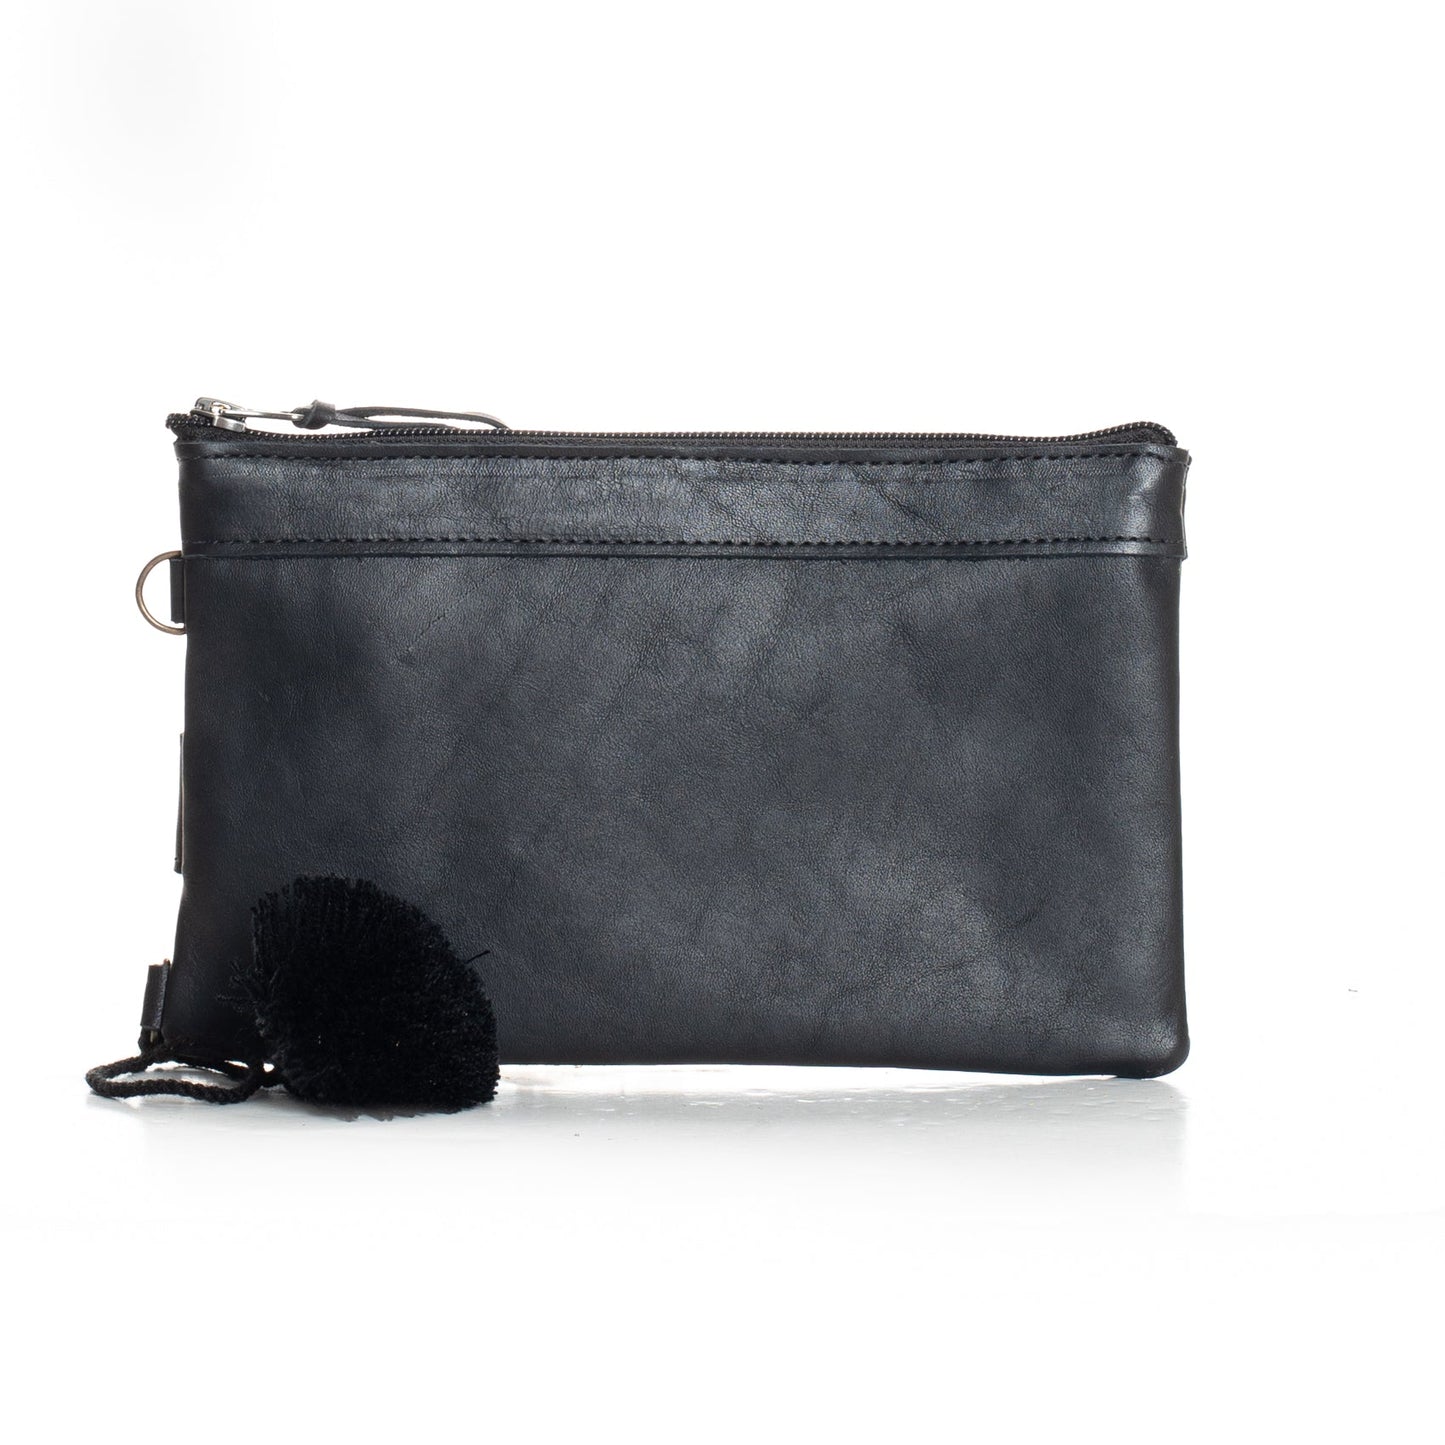 EVERYTHING CLUTCH - FULL LEATHER COLLECTION - BLACK LEATHER